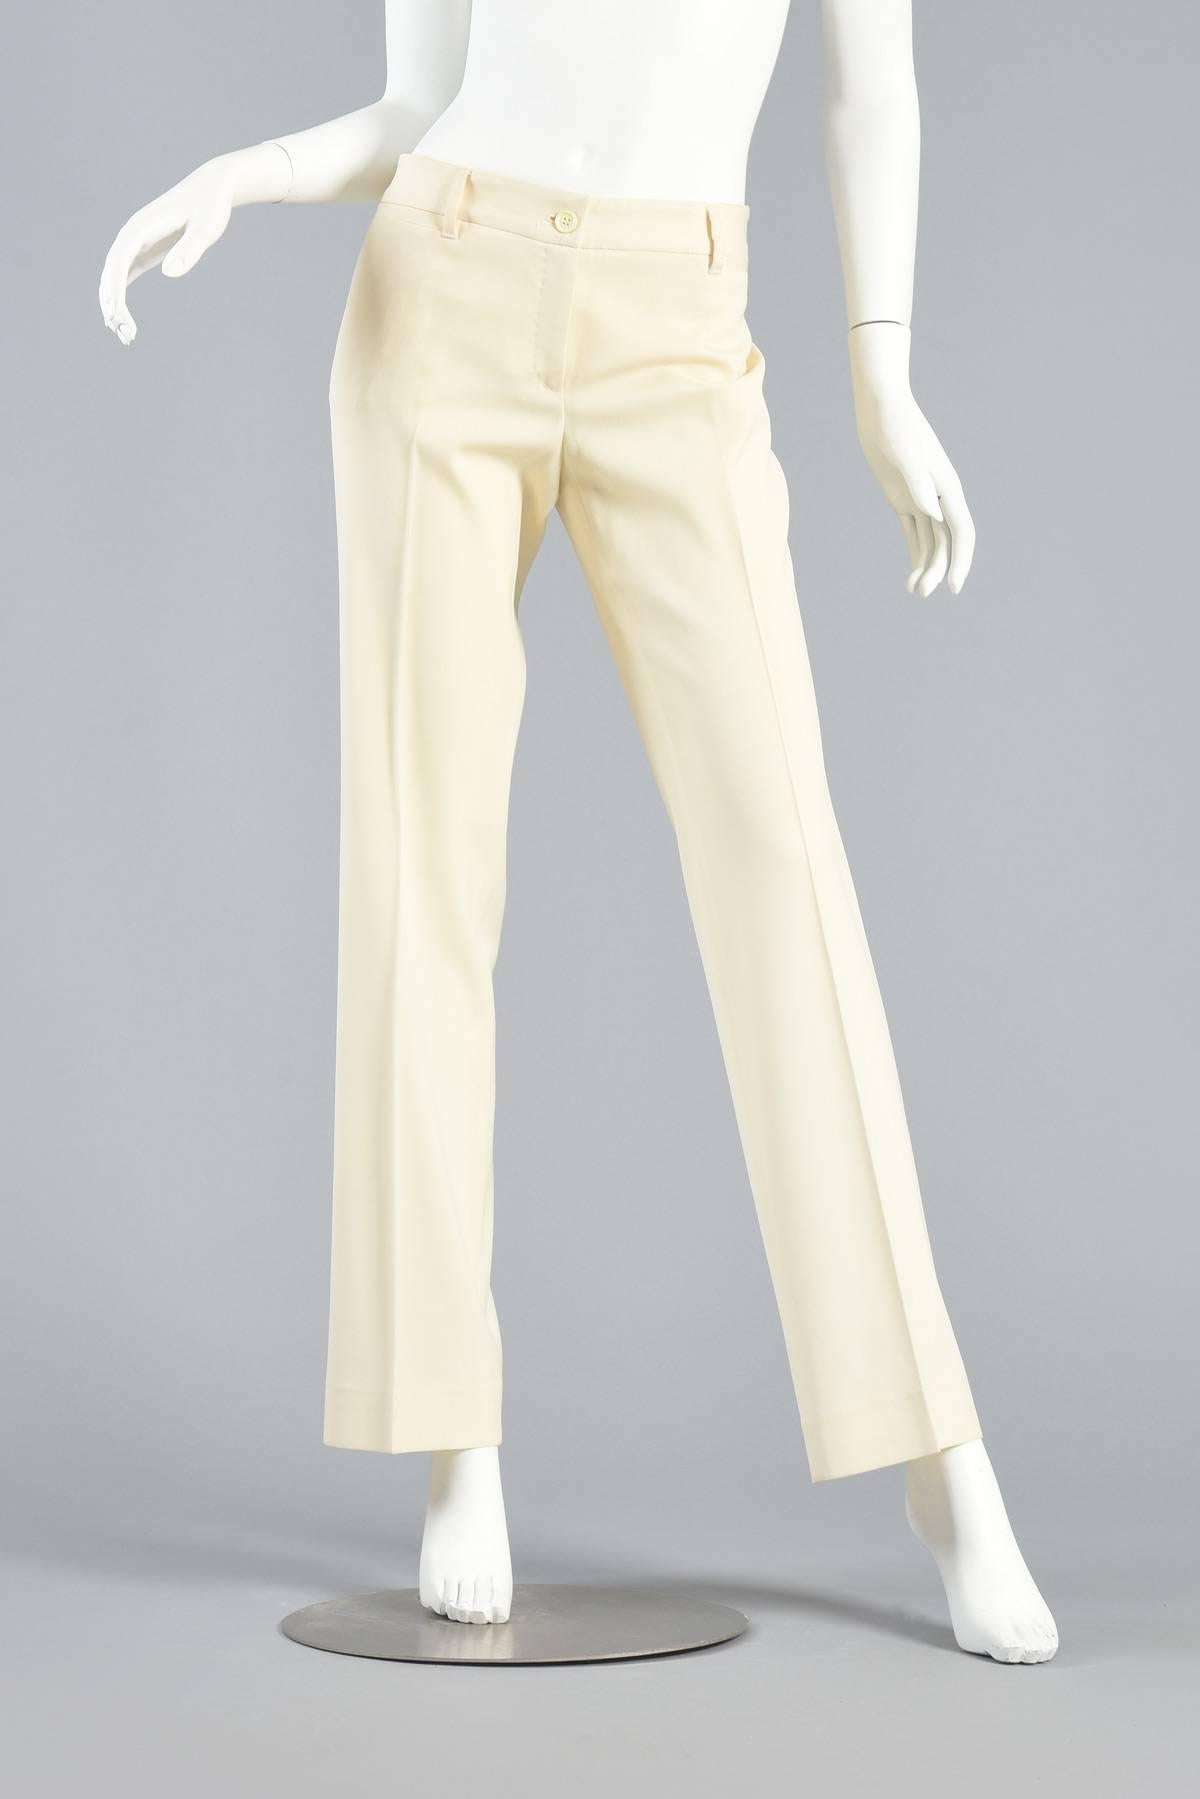 Dolce & Gabbana Ivory Tuxedo Suit In Excellent Condition For Sale In Yucca Valley, CA